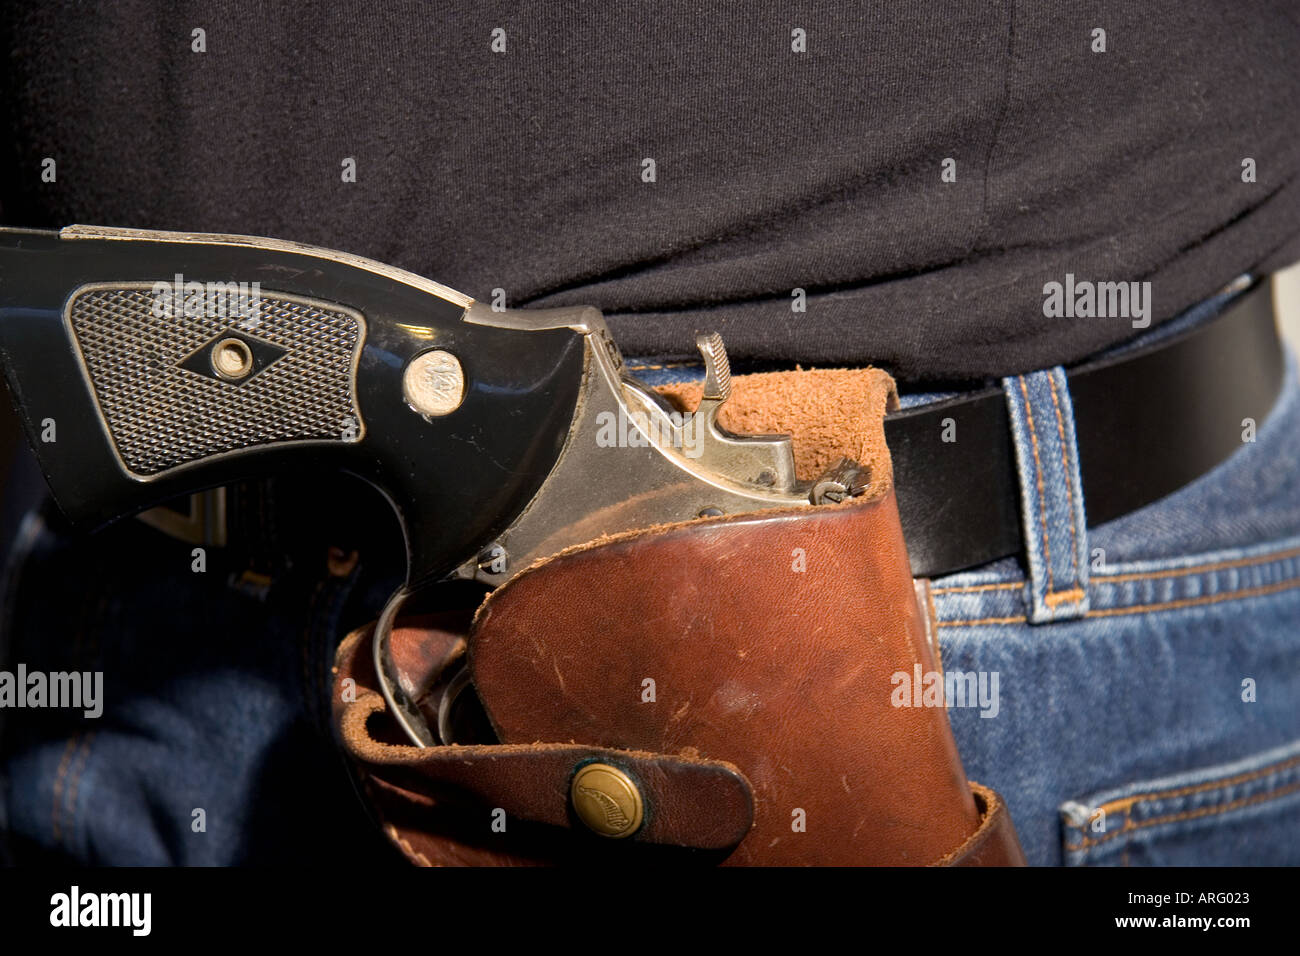 44 Magnum gun in holster on waist of person wearing jeans and a black t ...